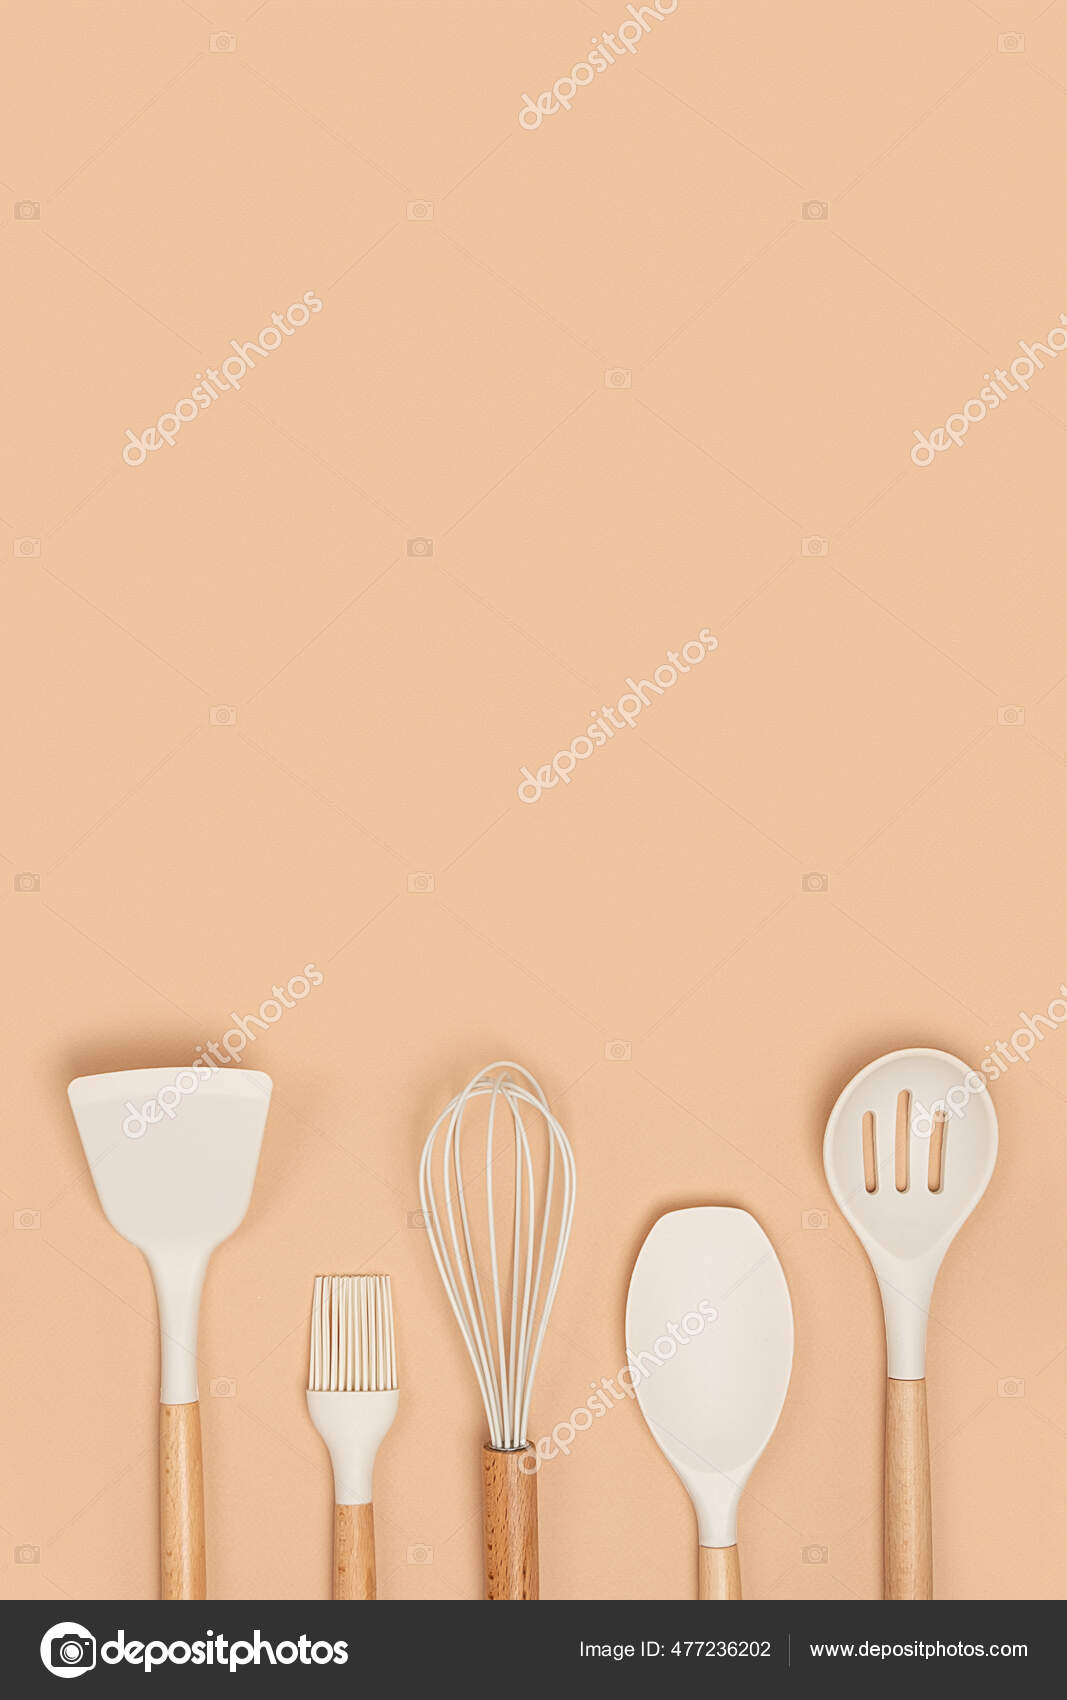 Cooking Utensil Set Silicone Kitchen Tools Wooden Handle Beige